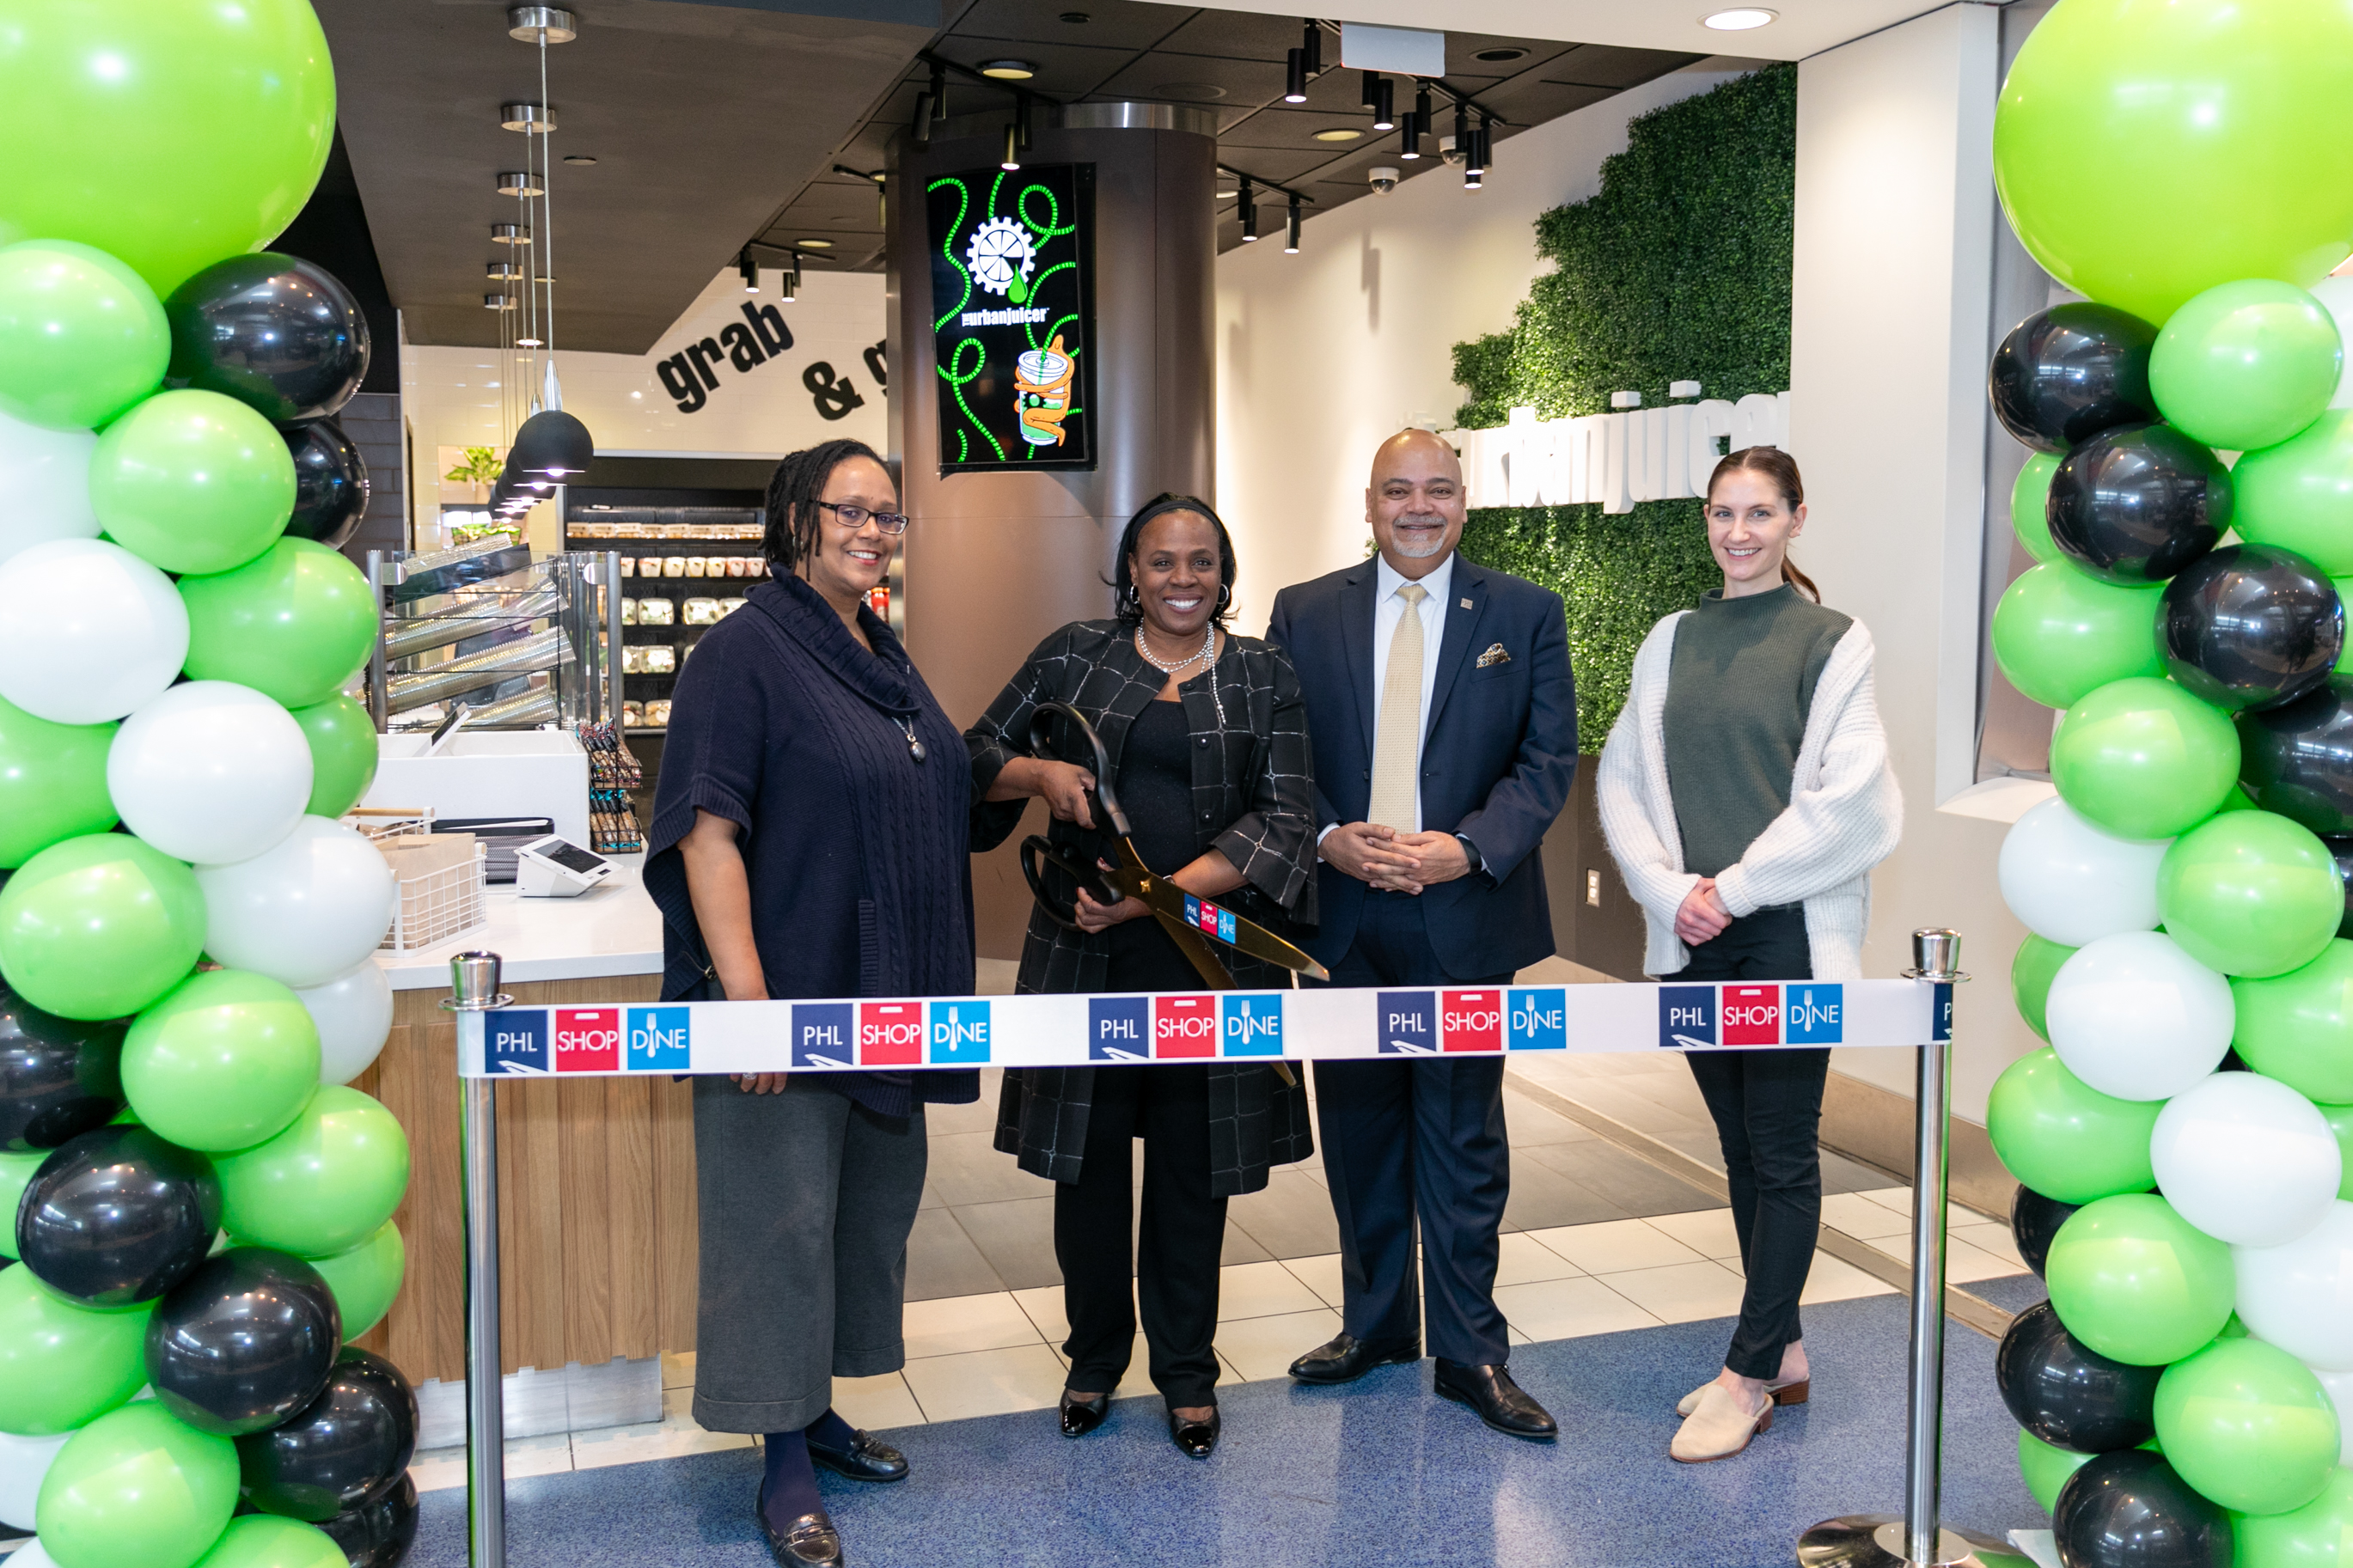 From left: Emily Nichols, Assistant General Manager, MarketPlace PHL, Sandra Long, SLA Worldwide founder and CEO; Atif Saeed, PHL CEO; and Ashley Vesay, Leasing Manager, MarketPlace PHL